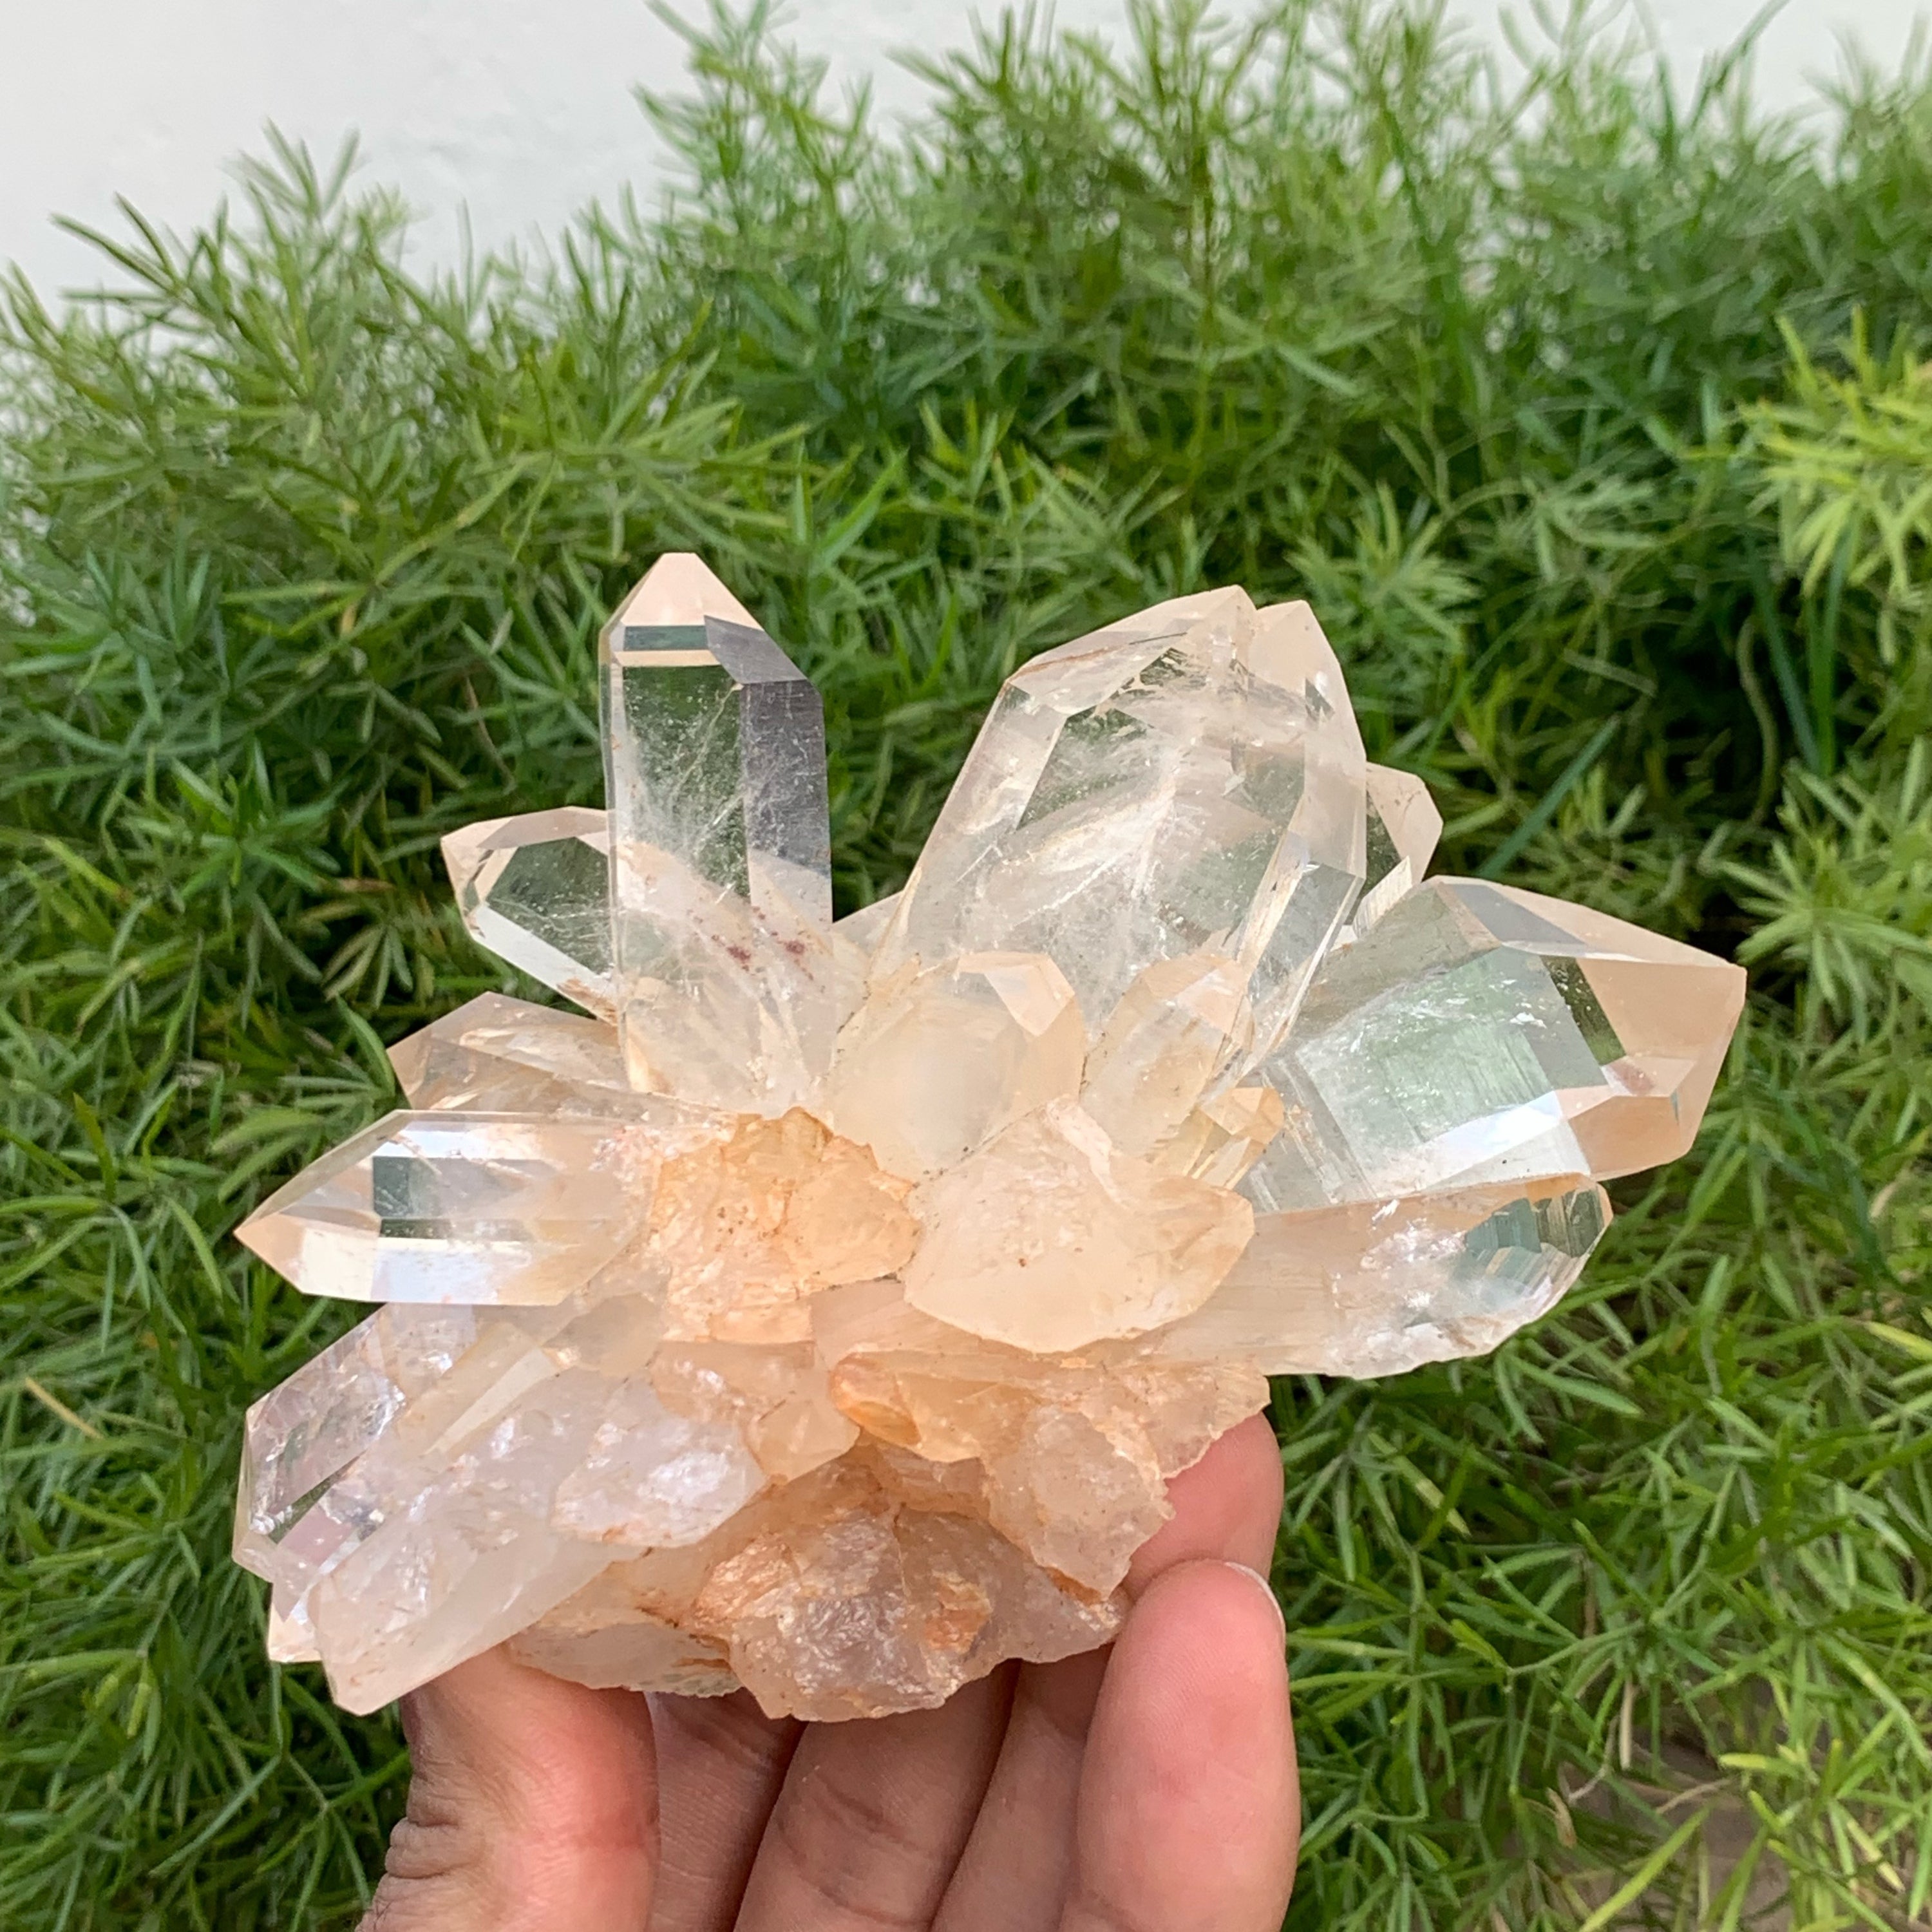 Lovely Quartz Bouquet Of Crystals